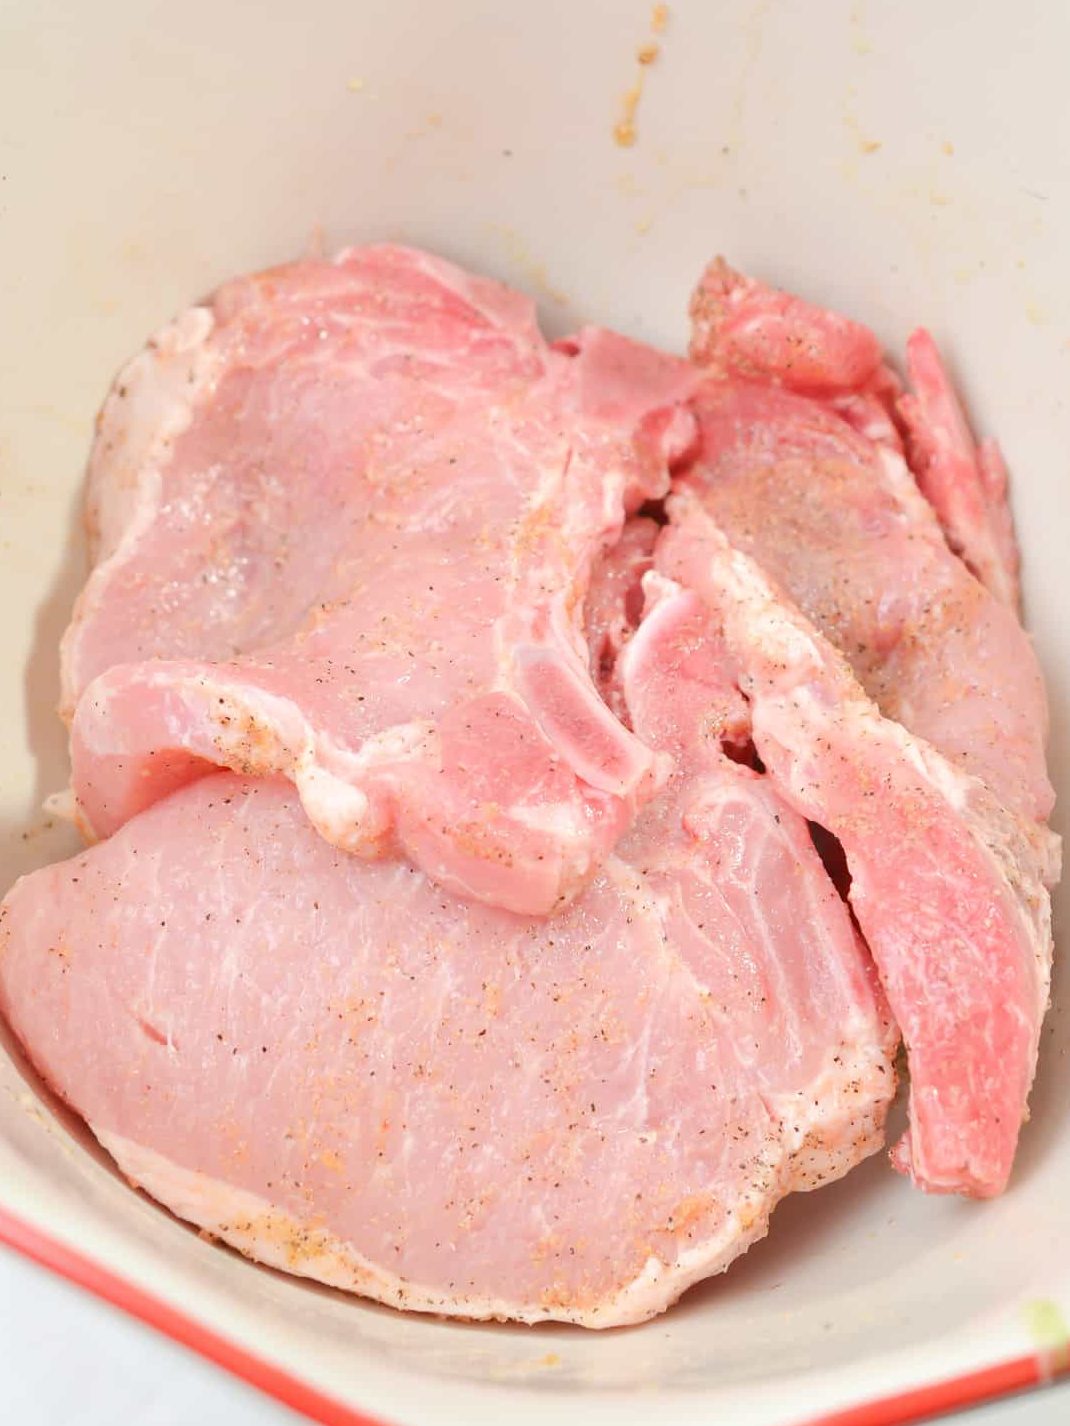 Place the pork chops in a bowl. Drizzle with olive oil, and coat in your choice of seasonings.